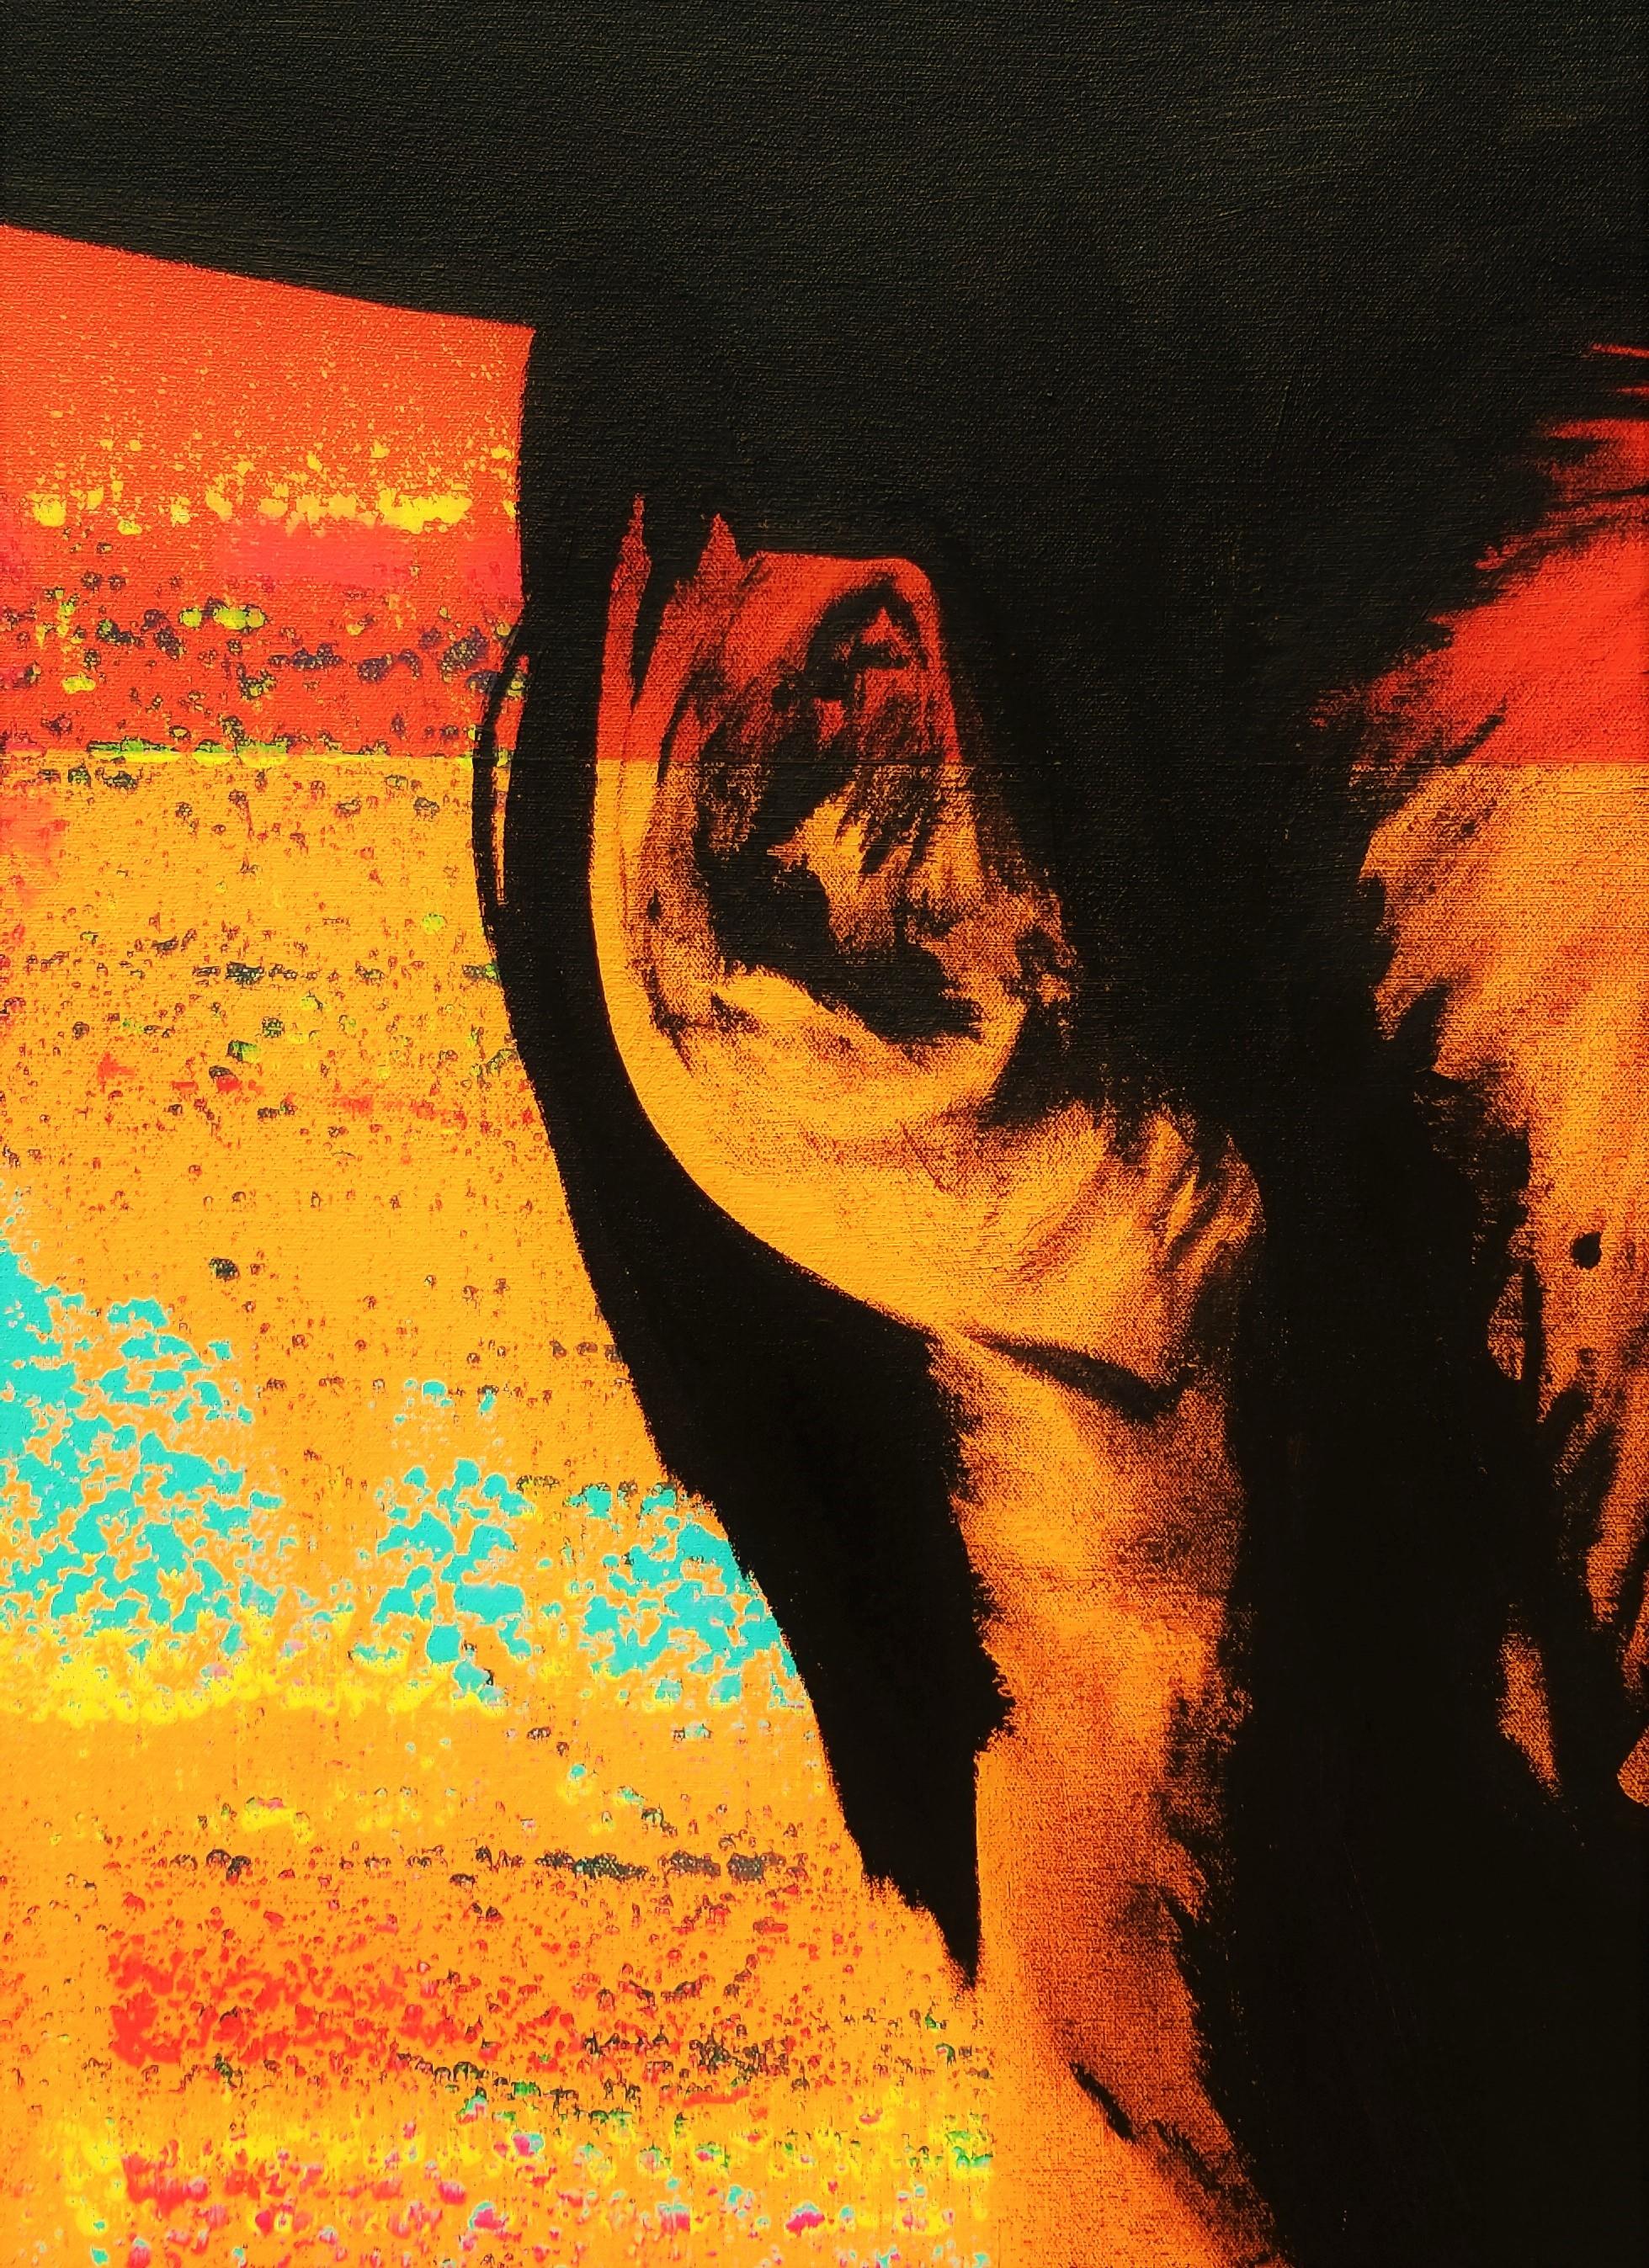 Clint Eastwood Icon III (Blondie) /// Contemporary Pop Painting Cowboy Western 4